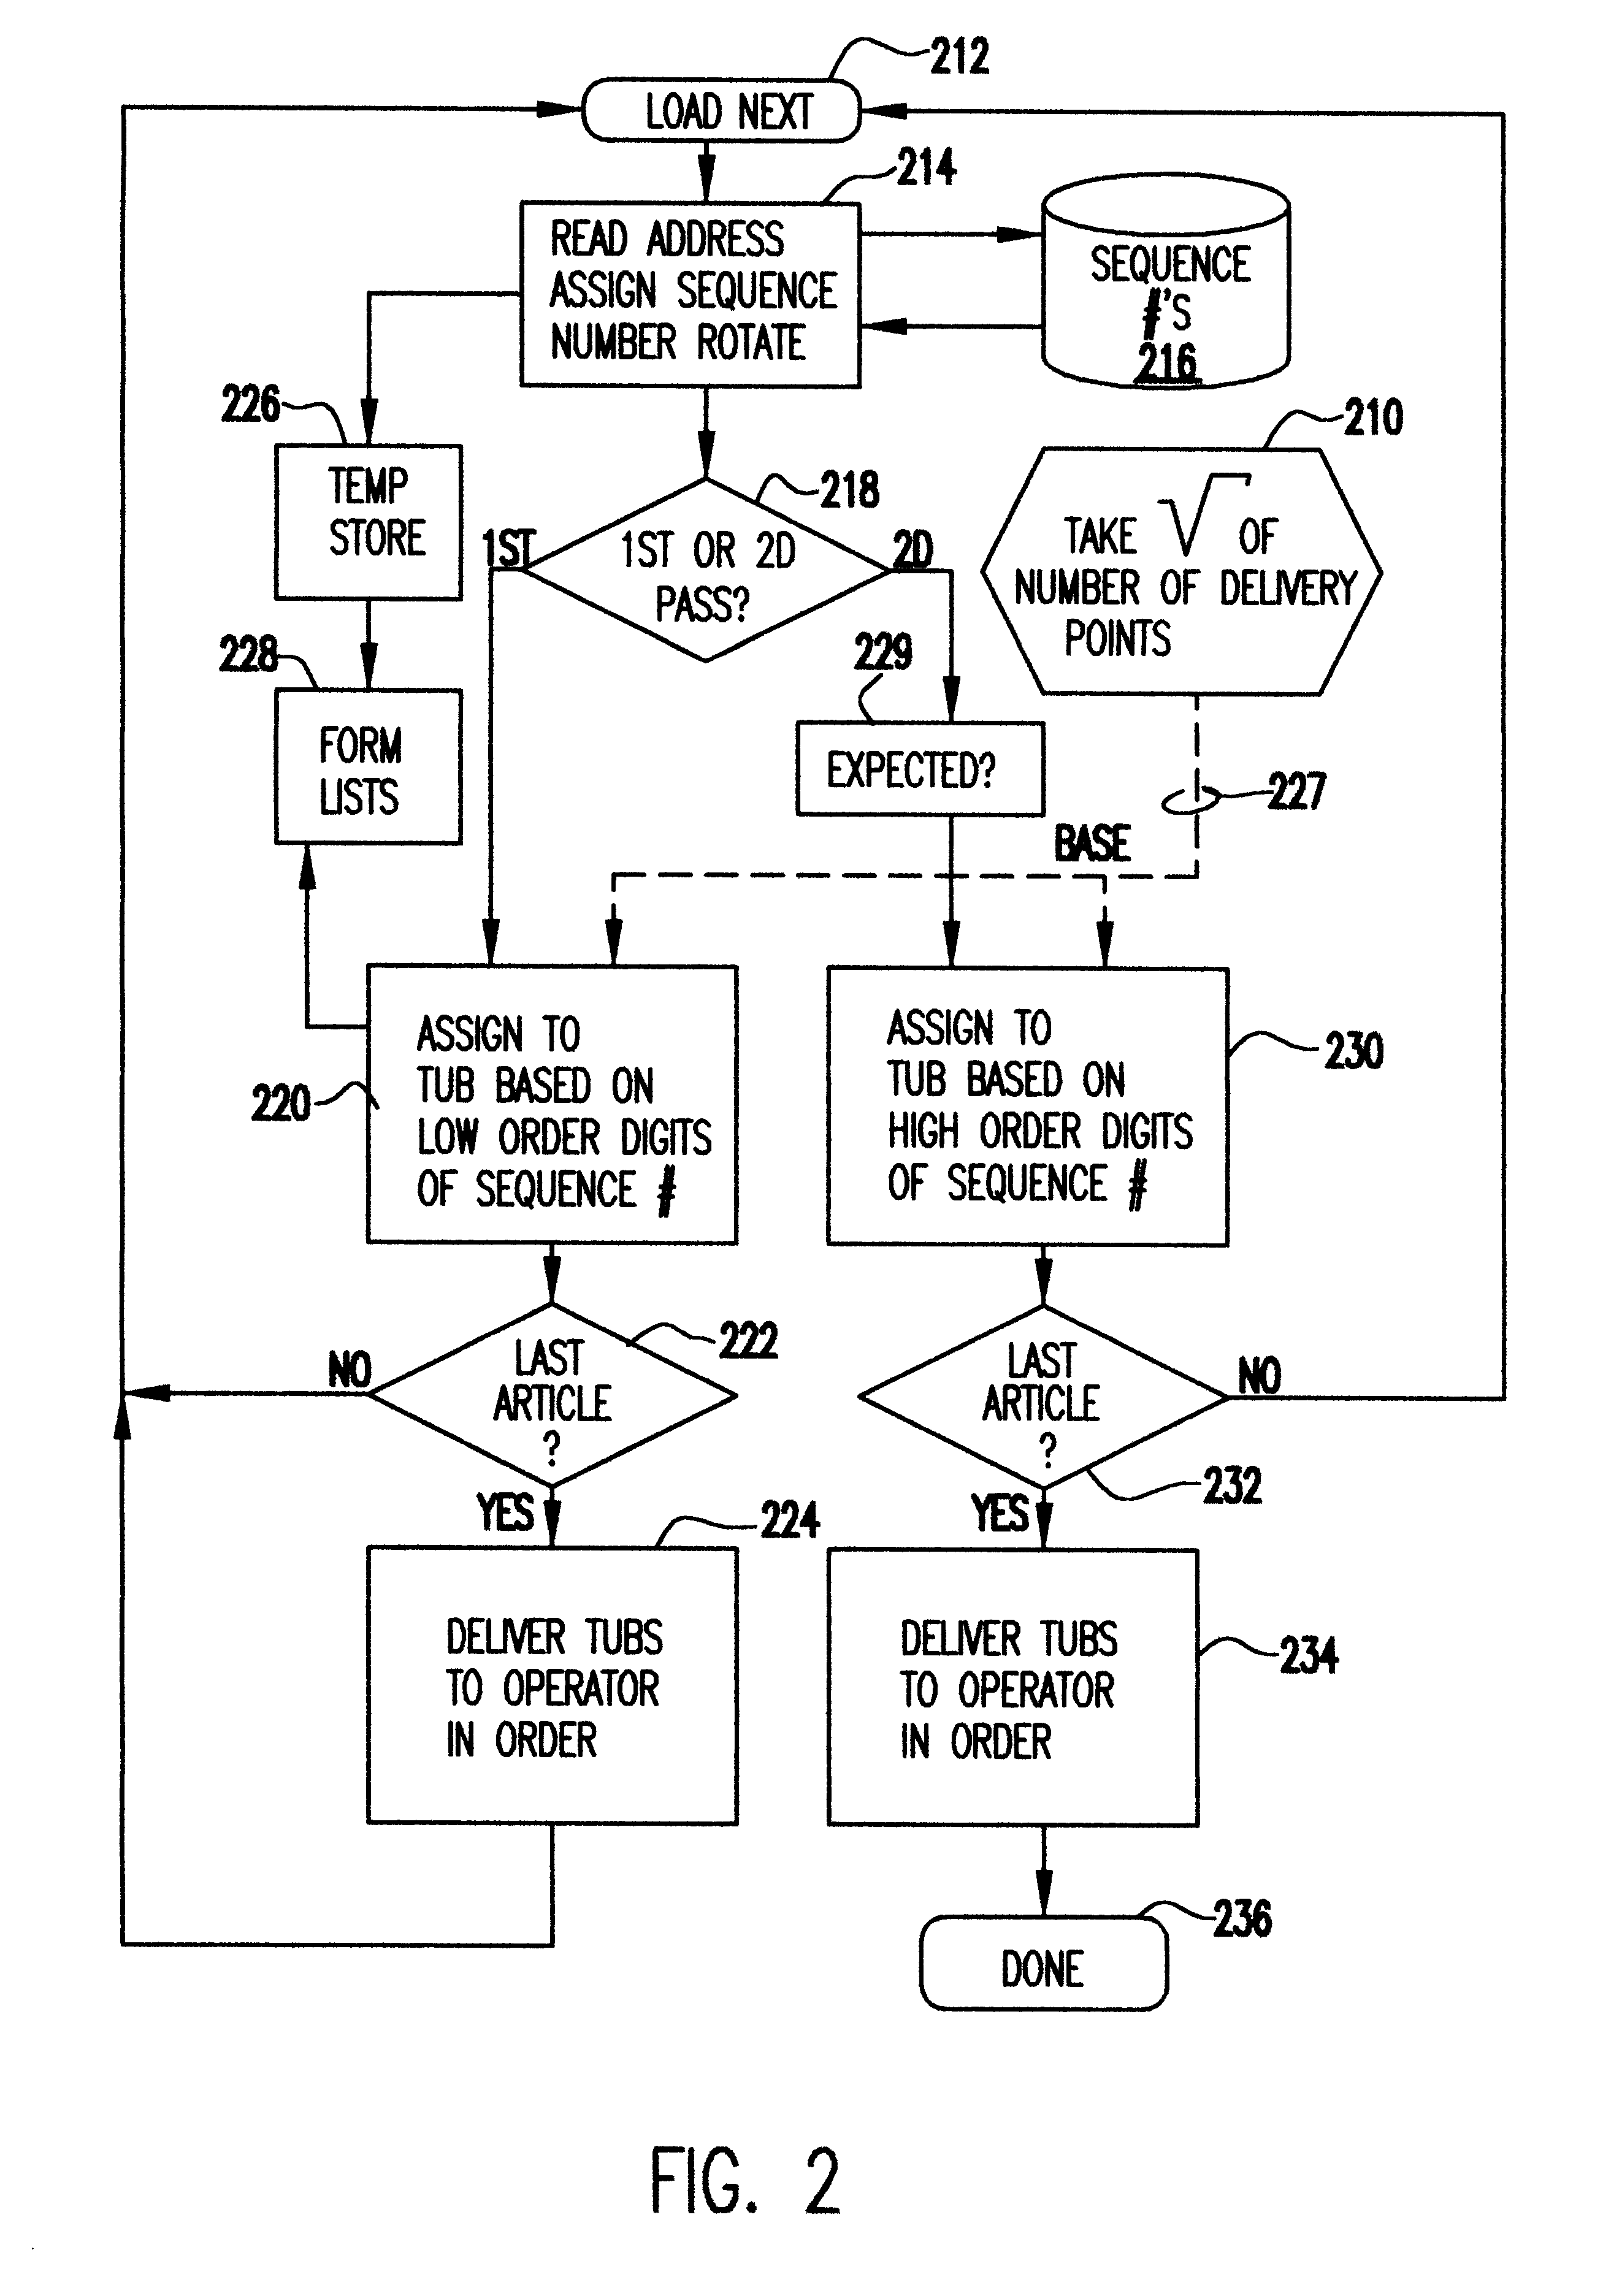 Object sortation for delivery sequencing